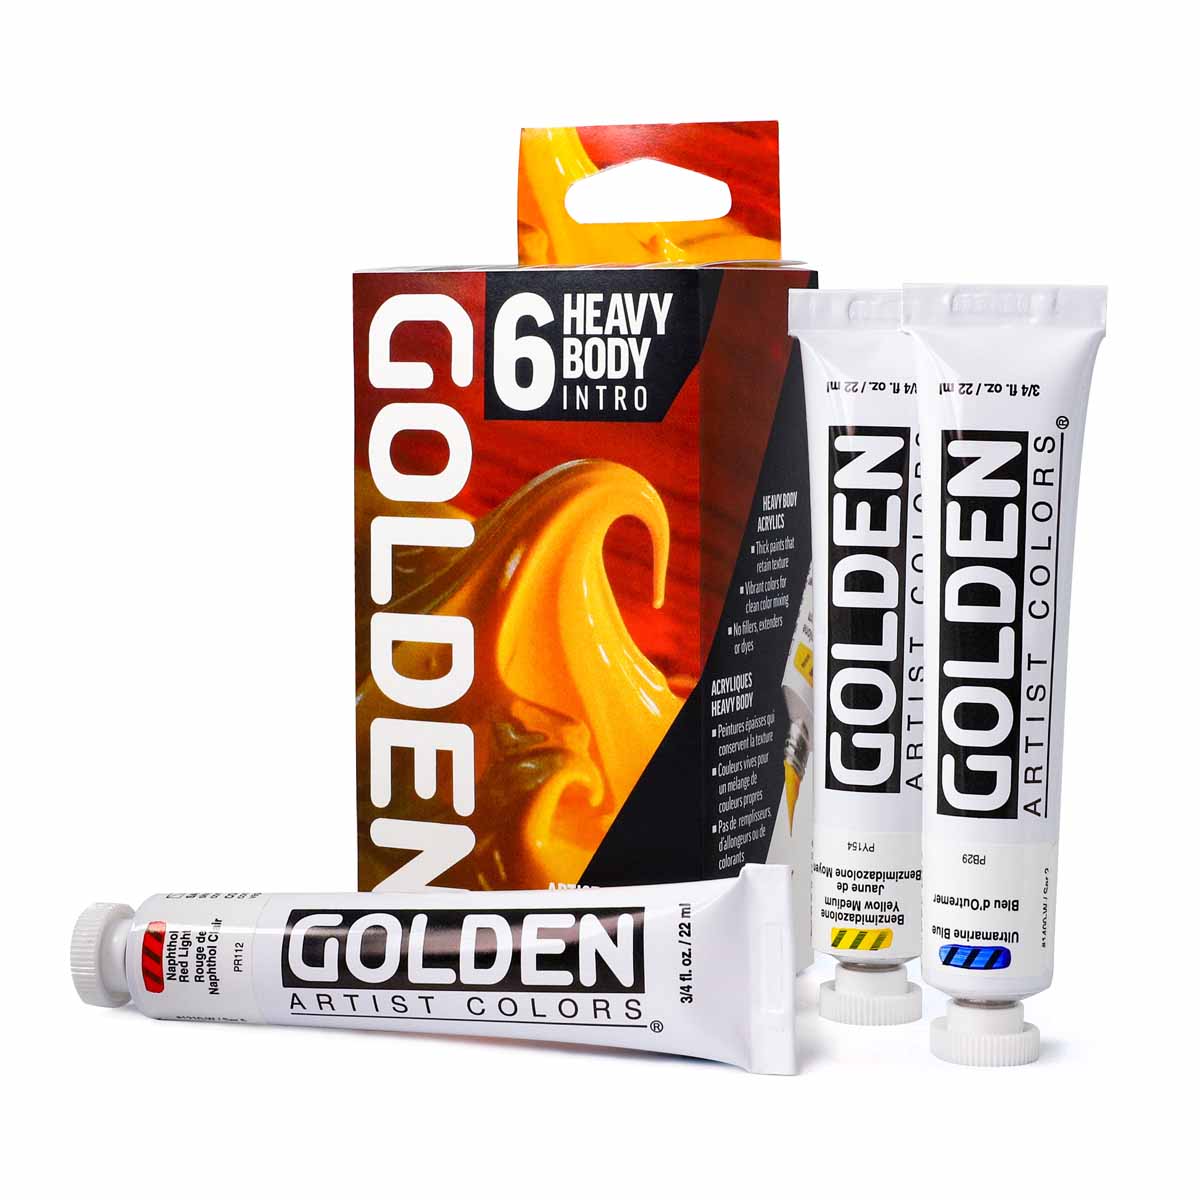 Golden Heavy Body Acrylic Introductory Set of 6, 22ml Tubes